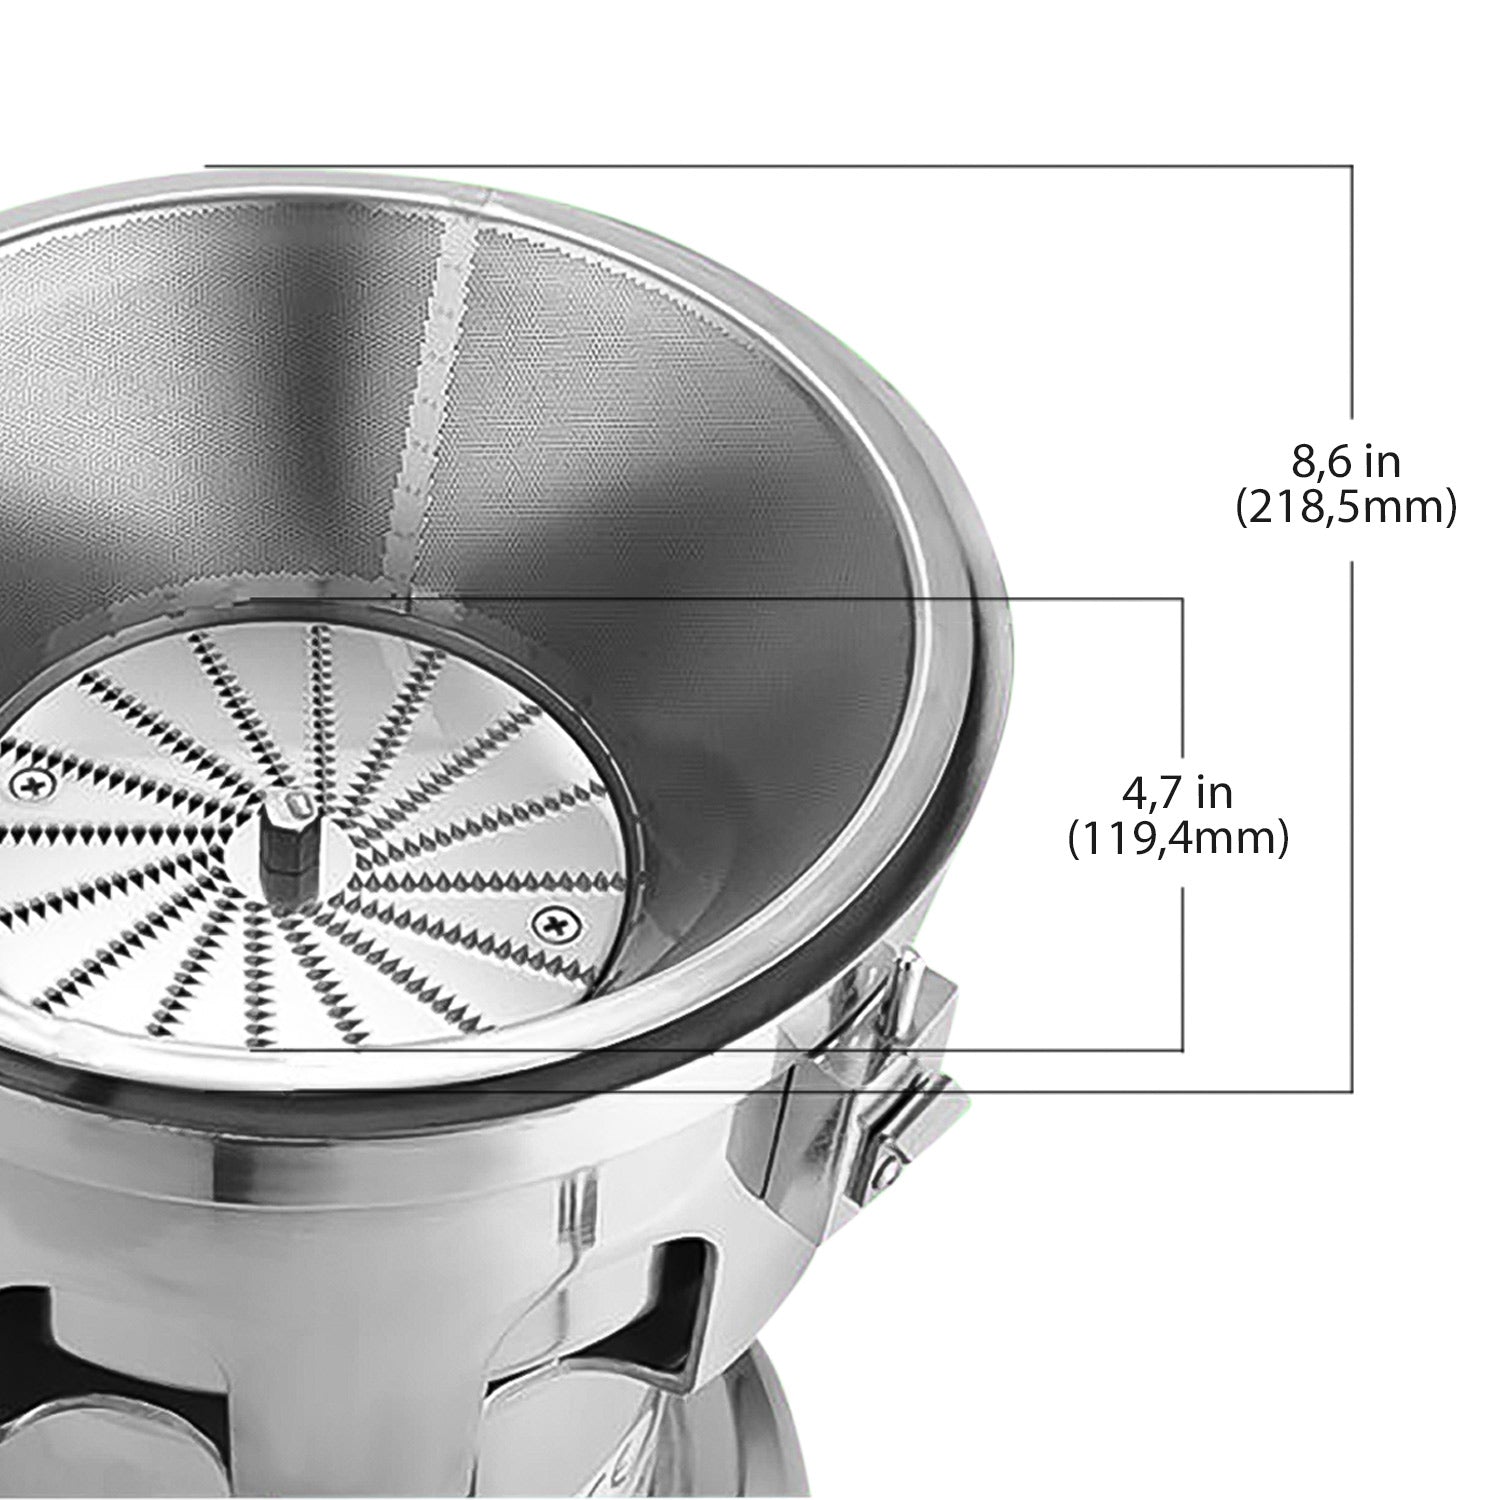 Commercial Juice Extractor Stainless Steel Juicer